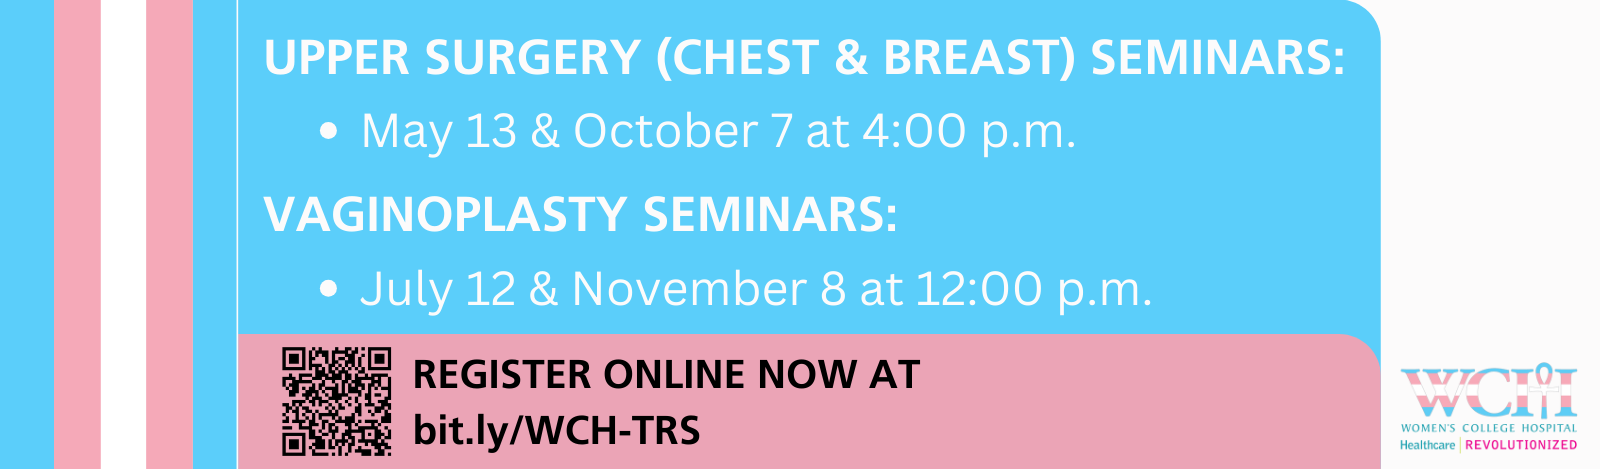 Webinar Schedule & Topic: 
May 13, 2024 - Upper Surgery (Chest & Breast)
July 12, 2024 - Vaginoplasty
October 7, 2024 - Upper Surgery (Chest & Breast)
November 8, 2024 - Vaginoplasty

Register Online Now at bit.ly/WCH-TRS